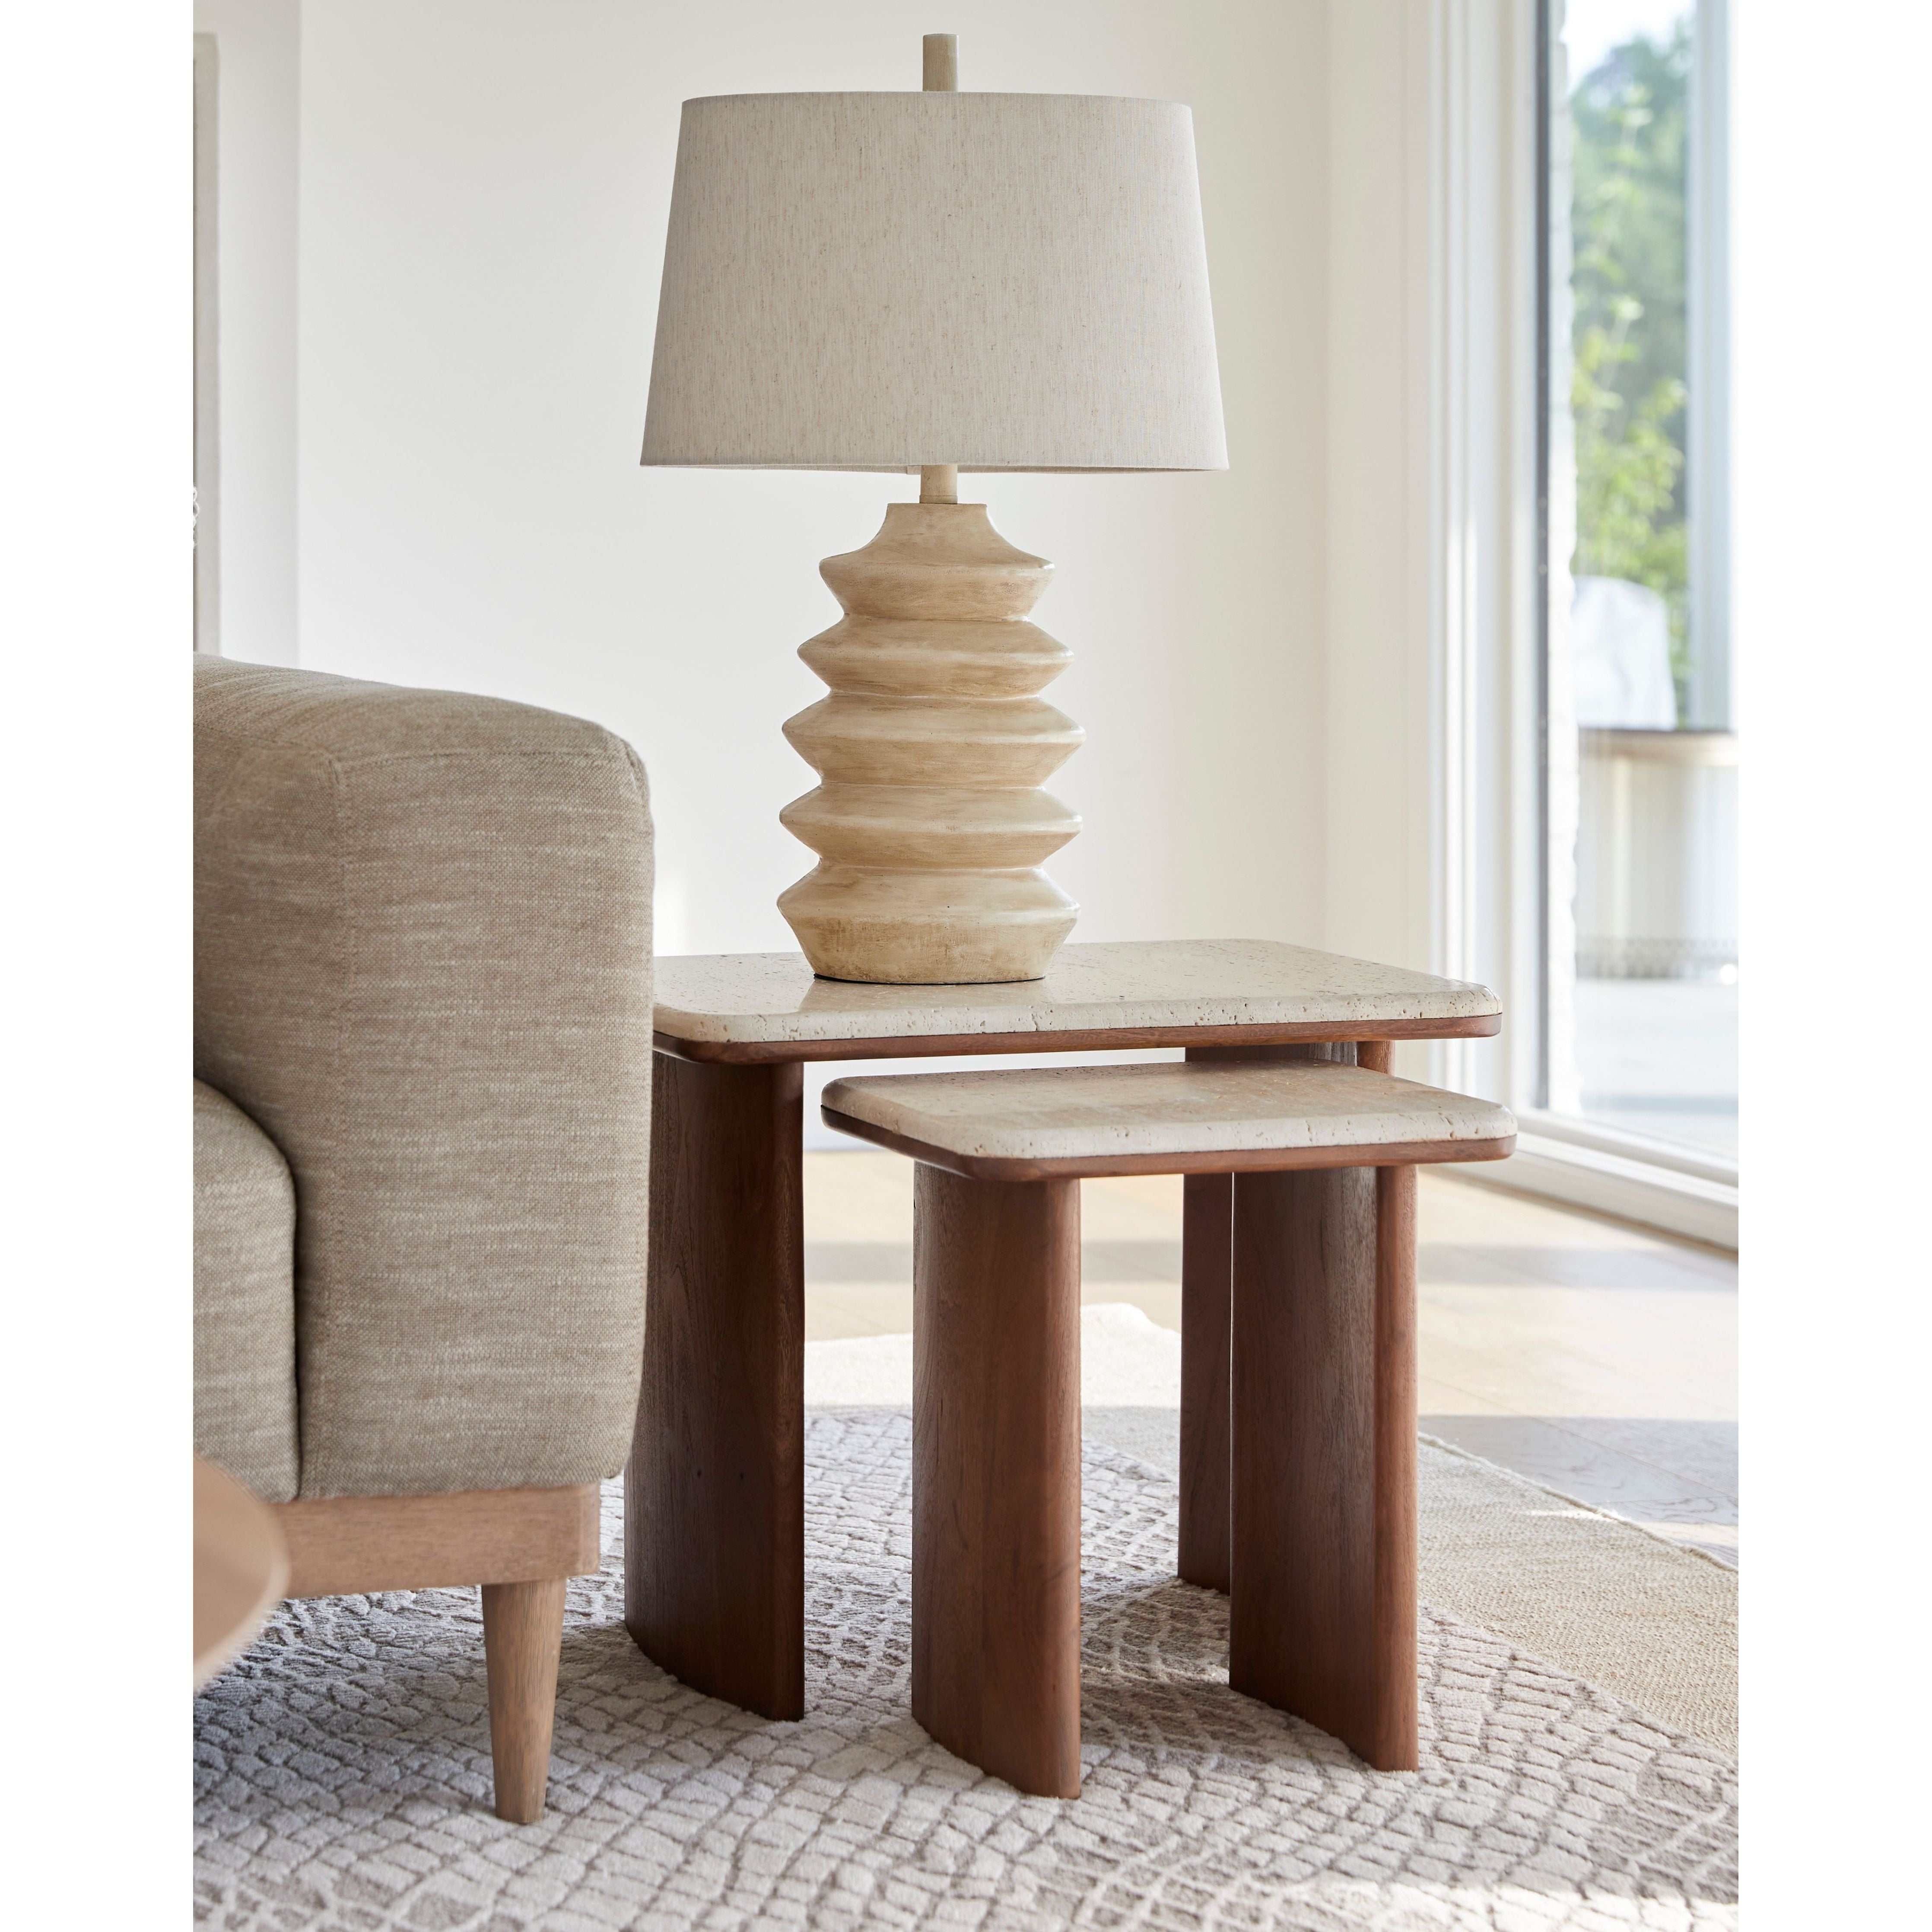 End Table Amethyst Home provides interior design, new home construction design consulting, vintage area rugs, and lighting in the Austin metro area.